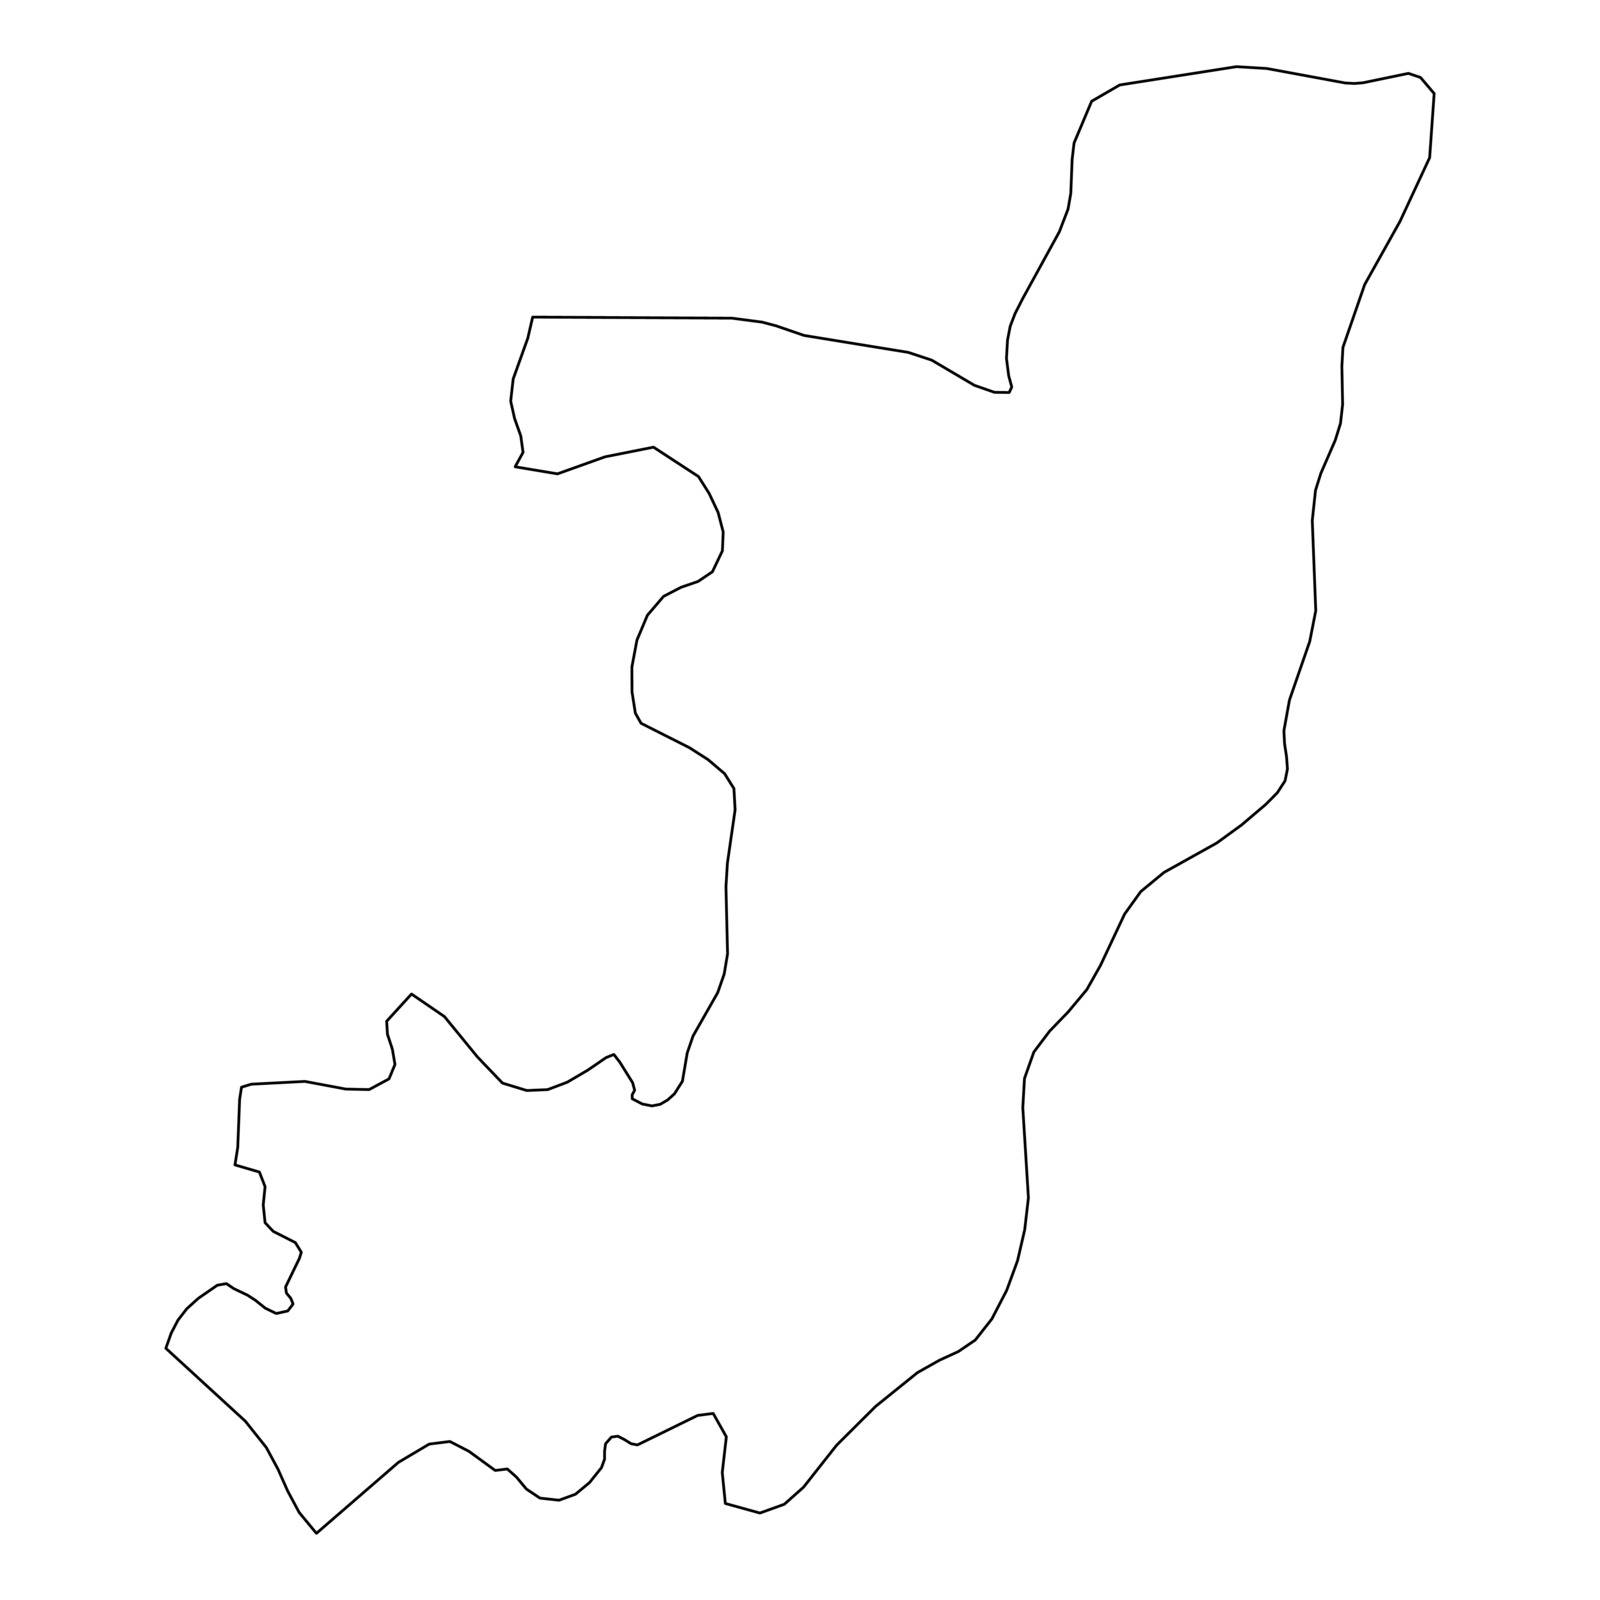 Republic of the Congo, former Zaire - solid black outline border map of country area. Simple flat vector illustration.